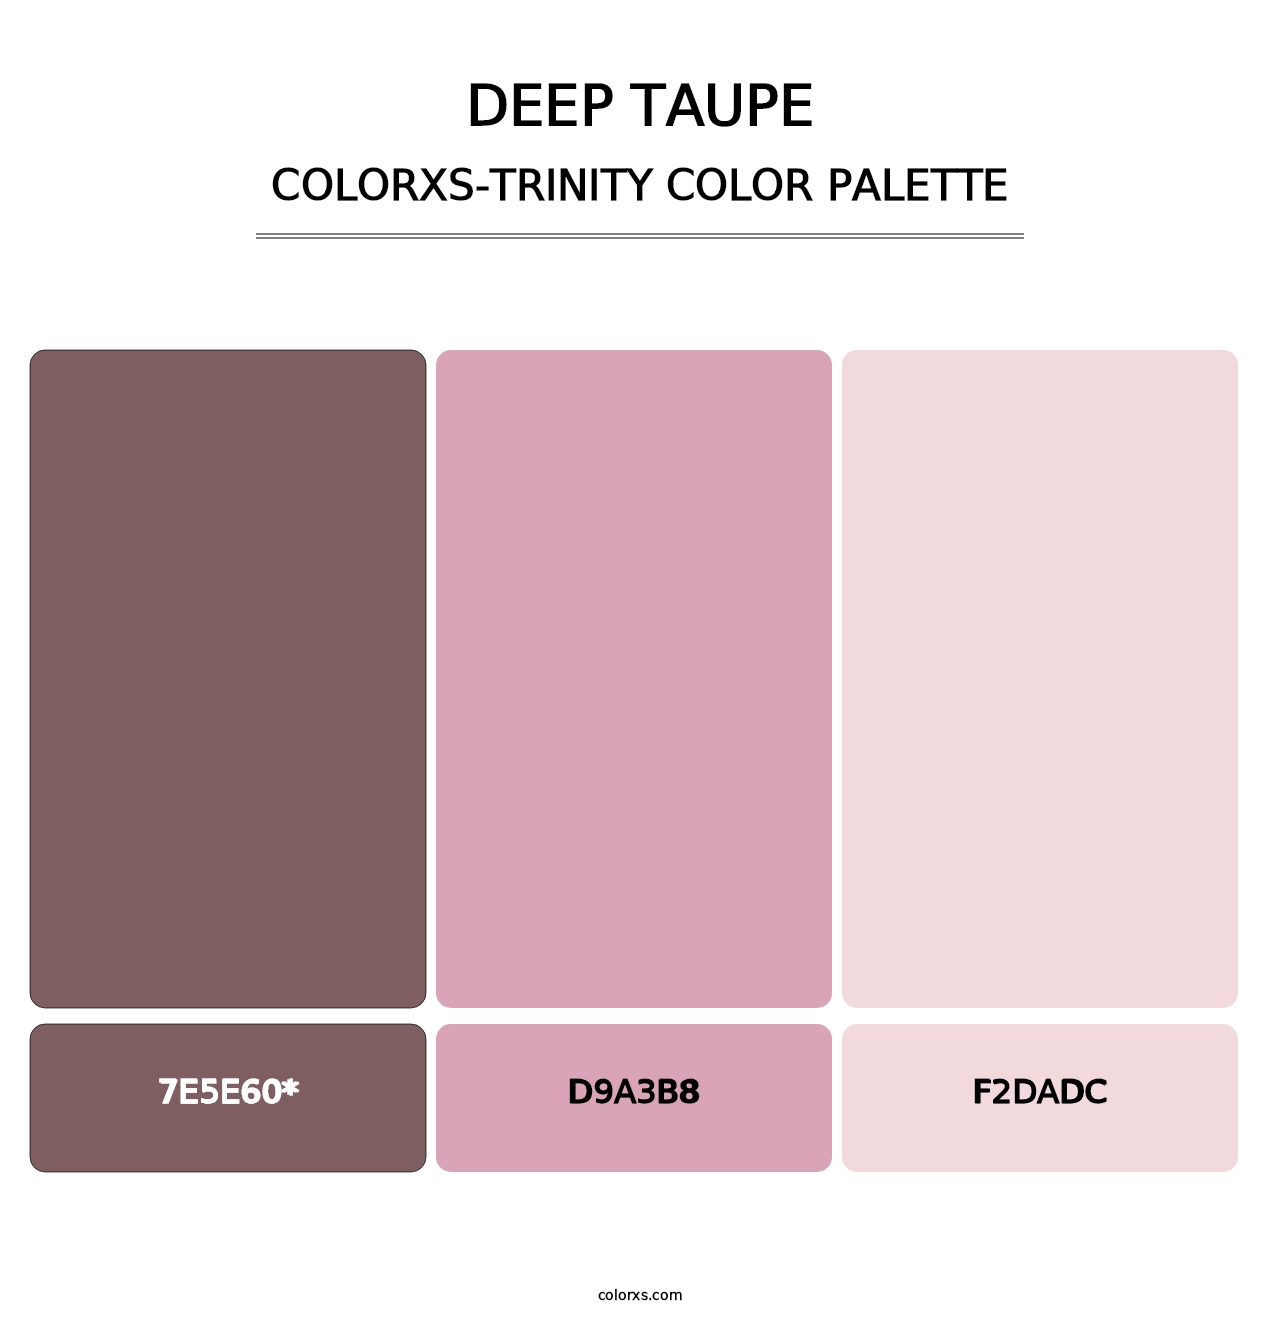 Deep Taupe - Colorxs Trinity Palette